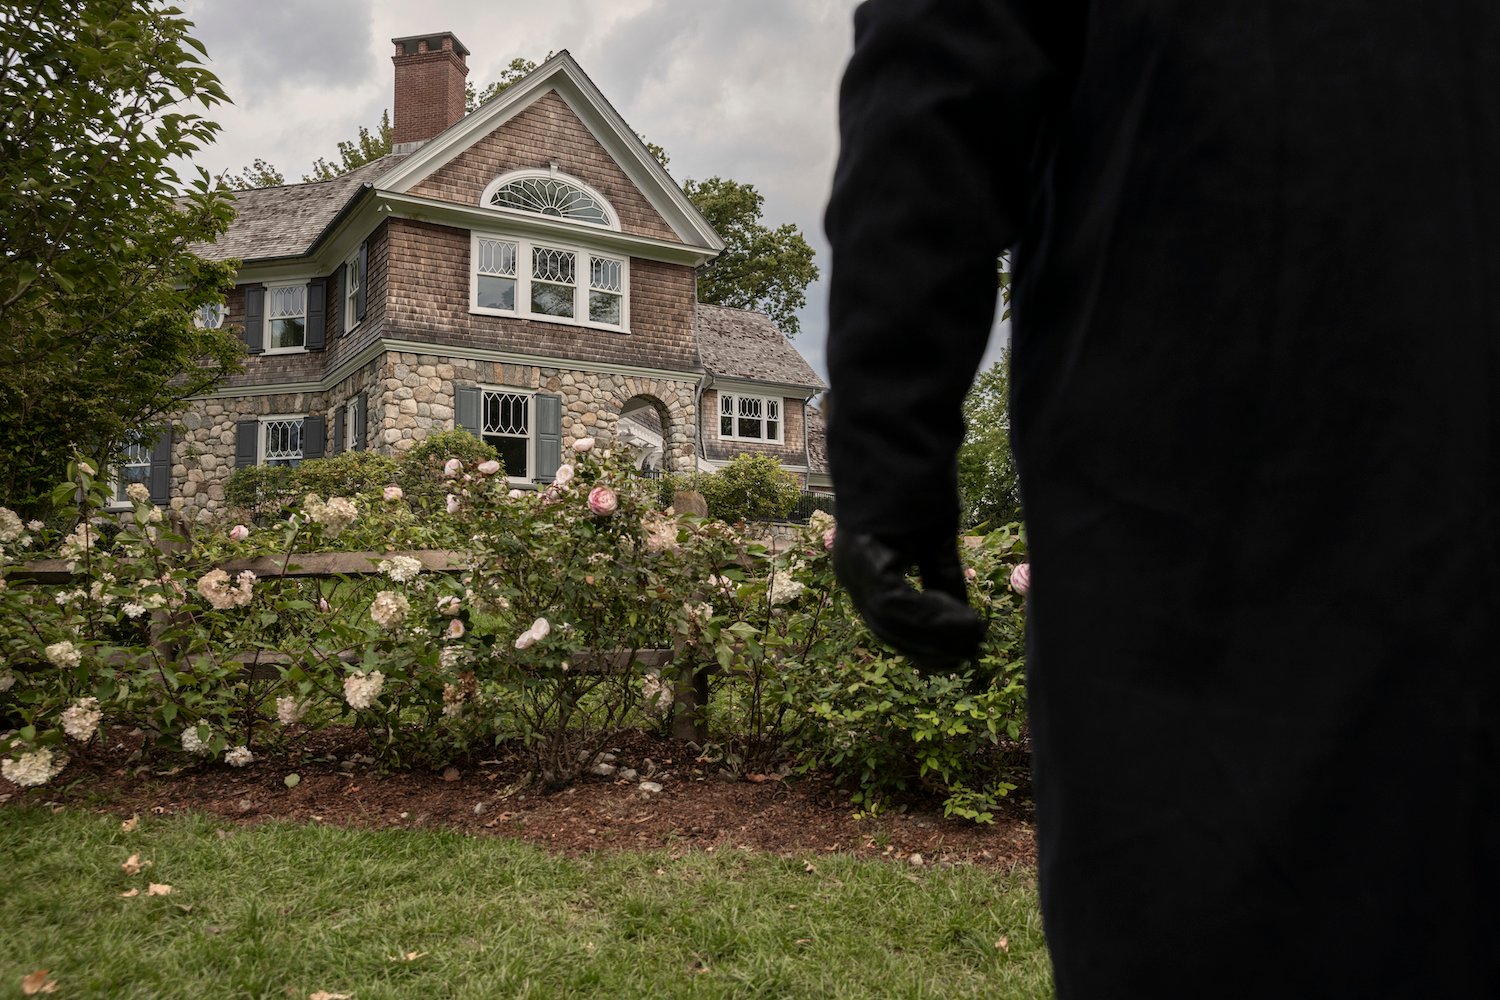 A dark figure watches a house in 'The Watcher' photo from the Netflix true crime drama